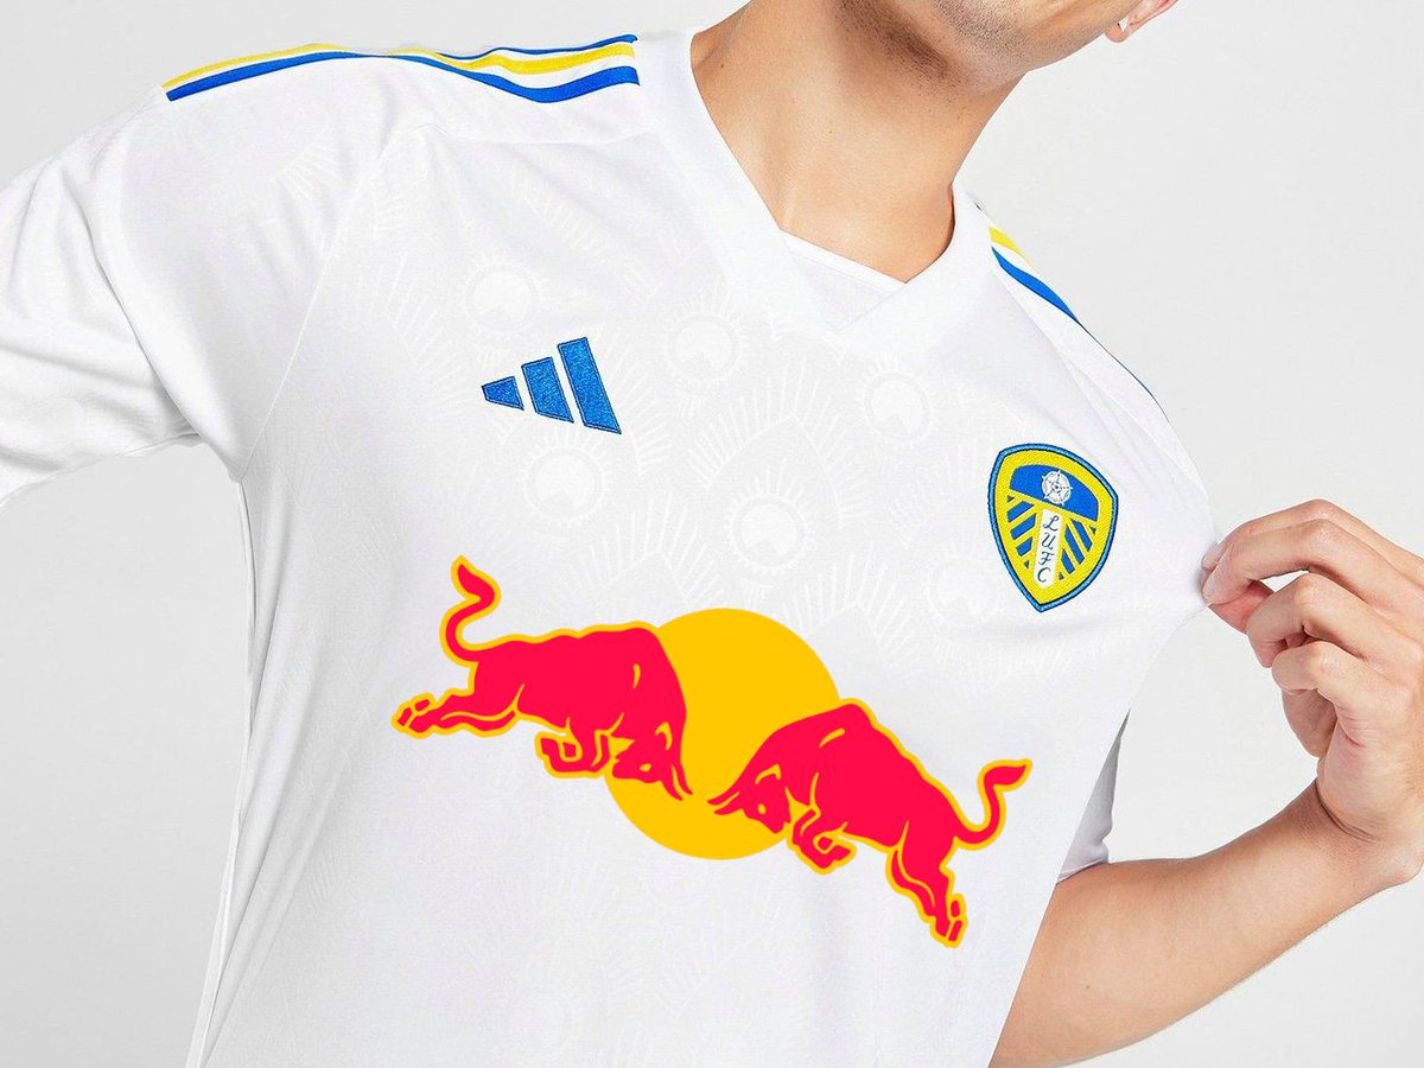 Trending: Leeds United 24/25 Home And Away Kit Concepts With Red Bull Logo